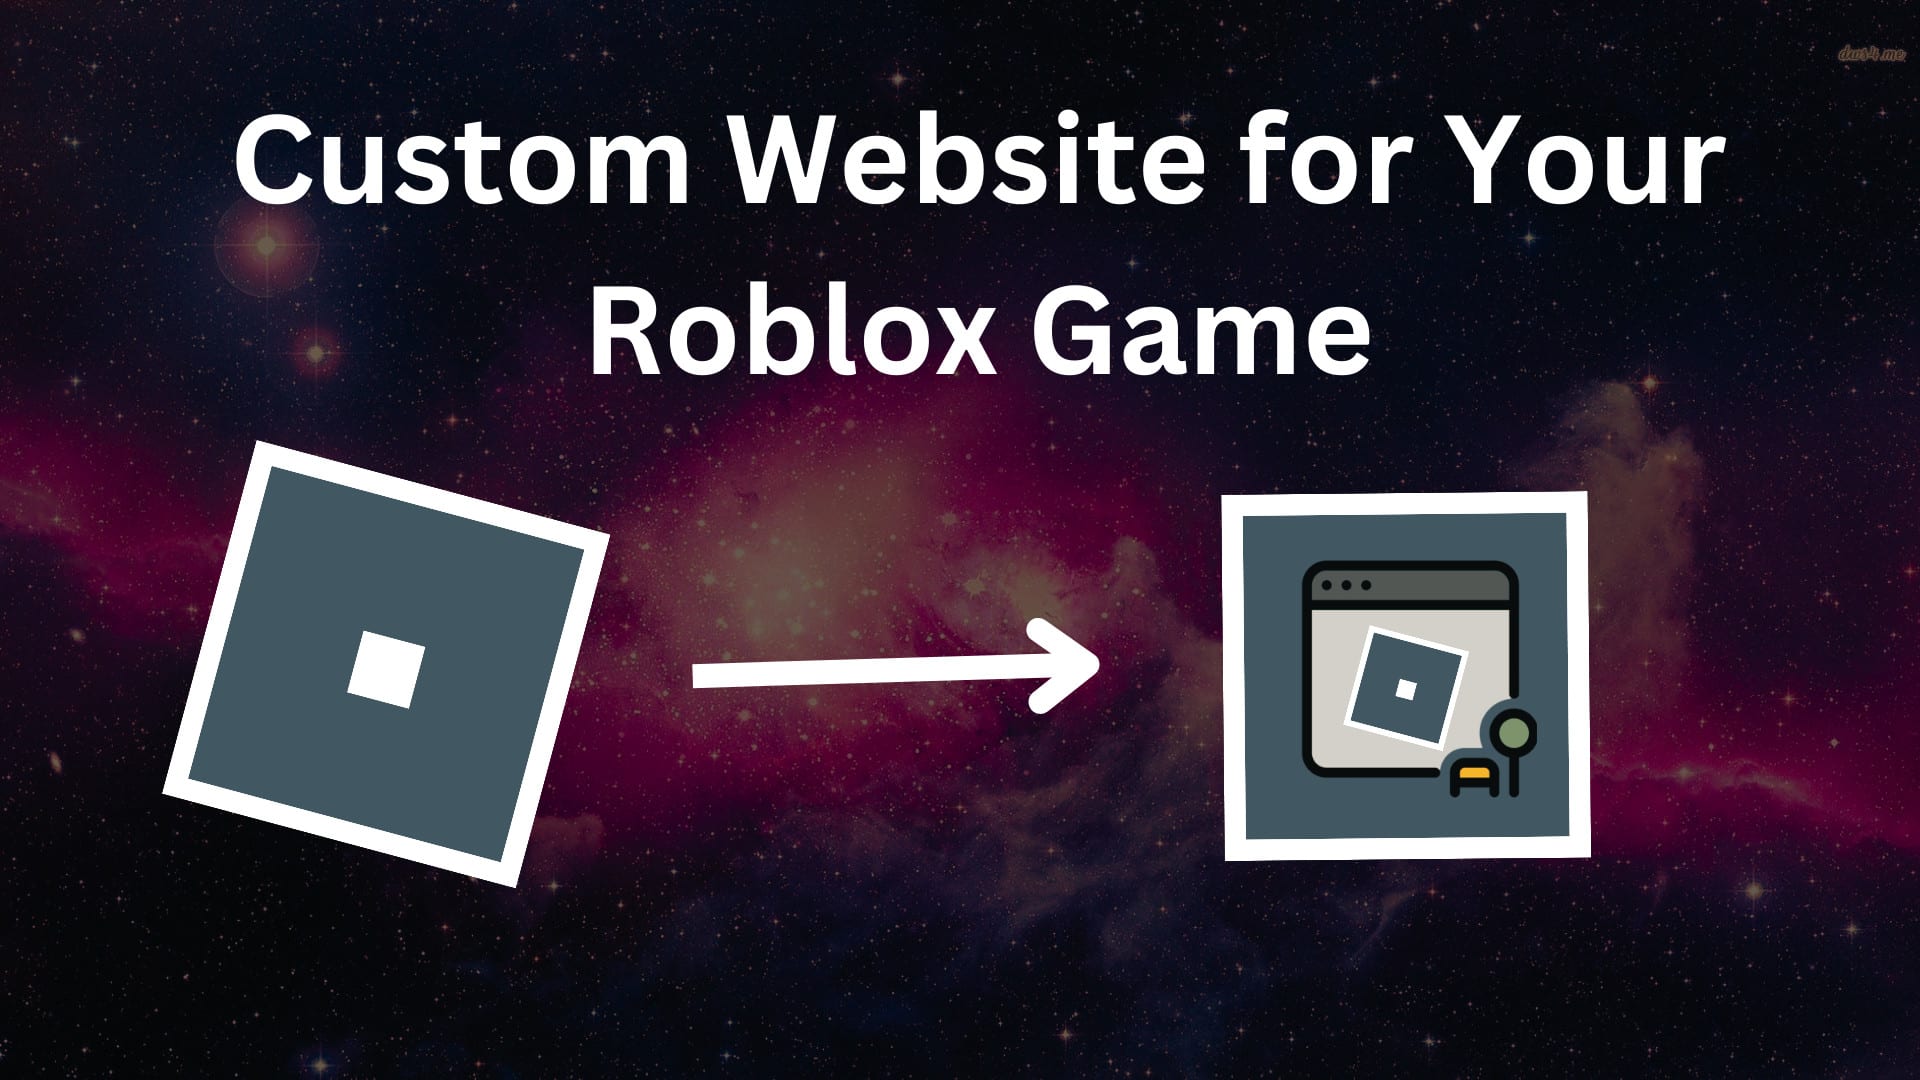 Code your roblox game landing page by Benrybytes